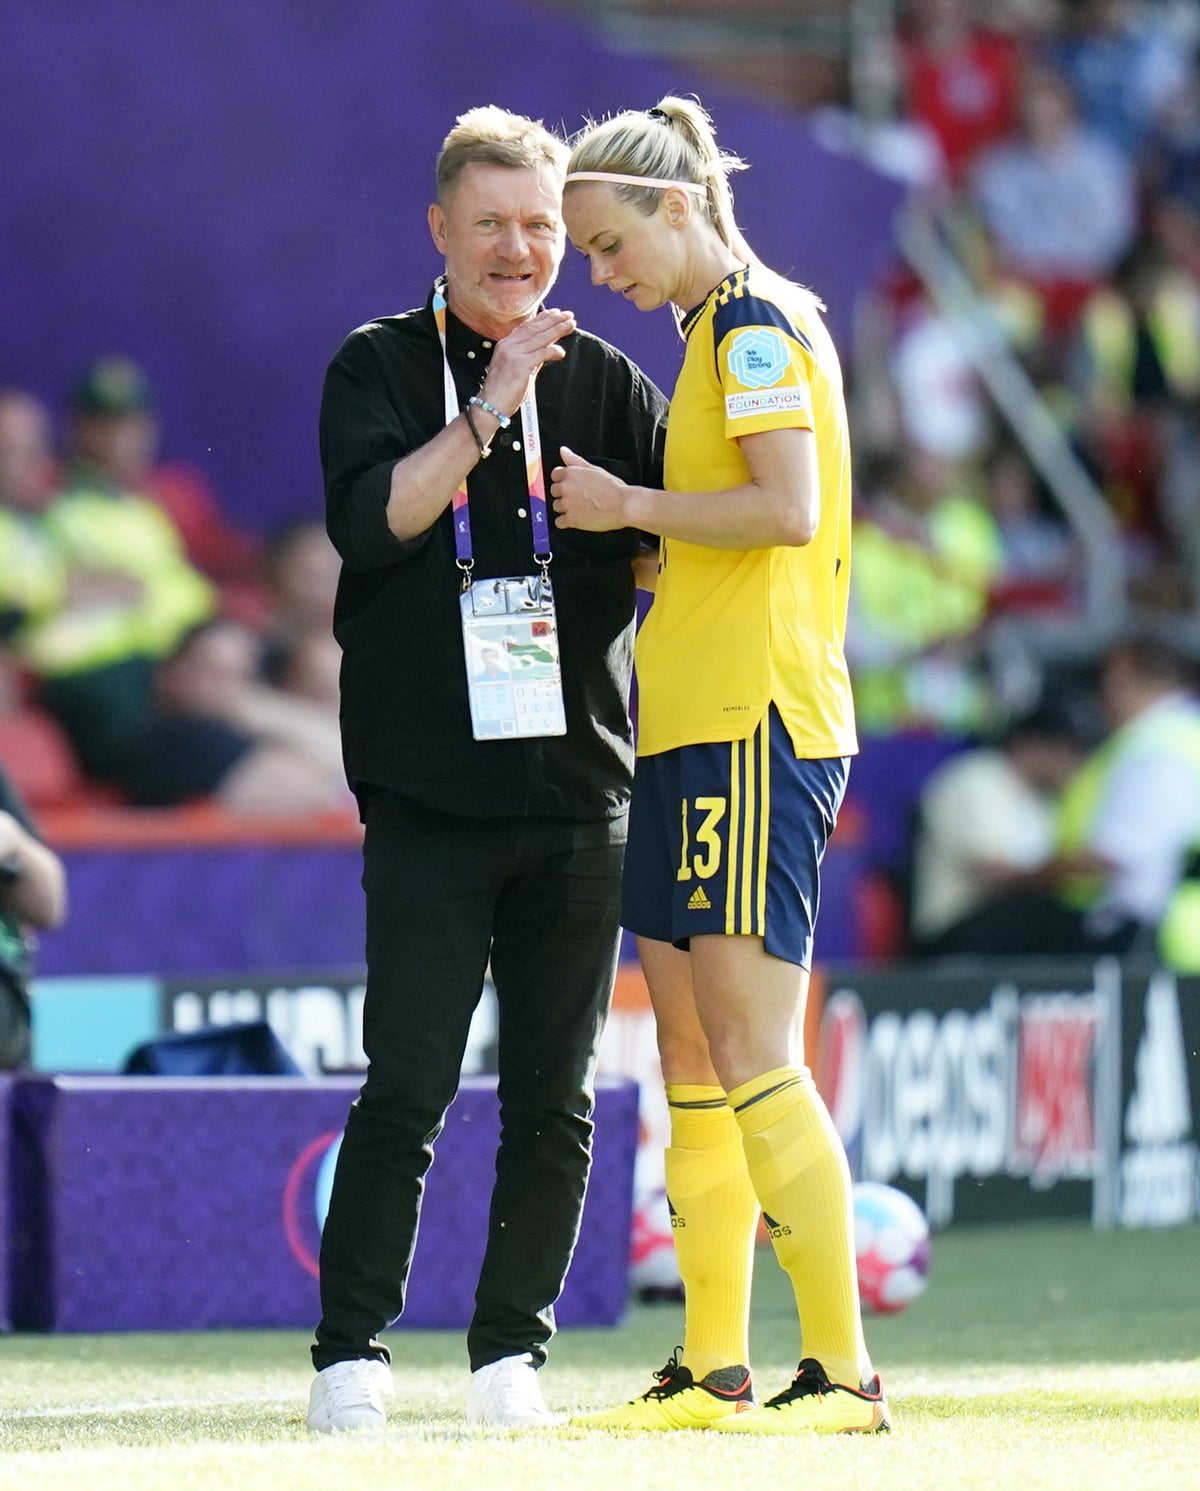 Sweden coach Peter Gerhardsson aiming to have ‘very good plan’ for England clash